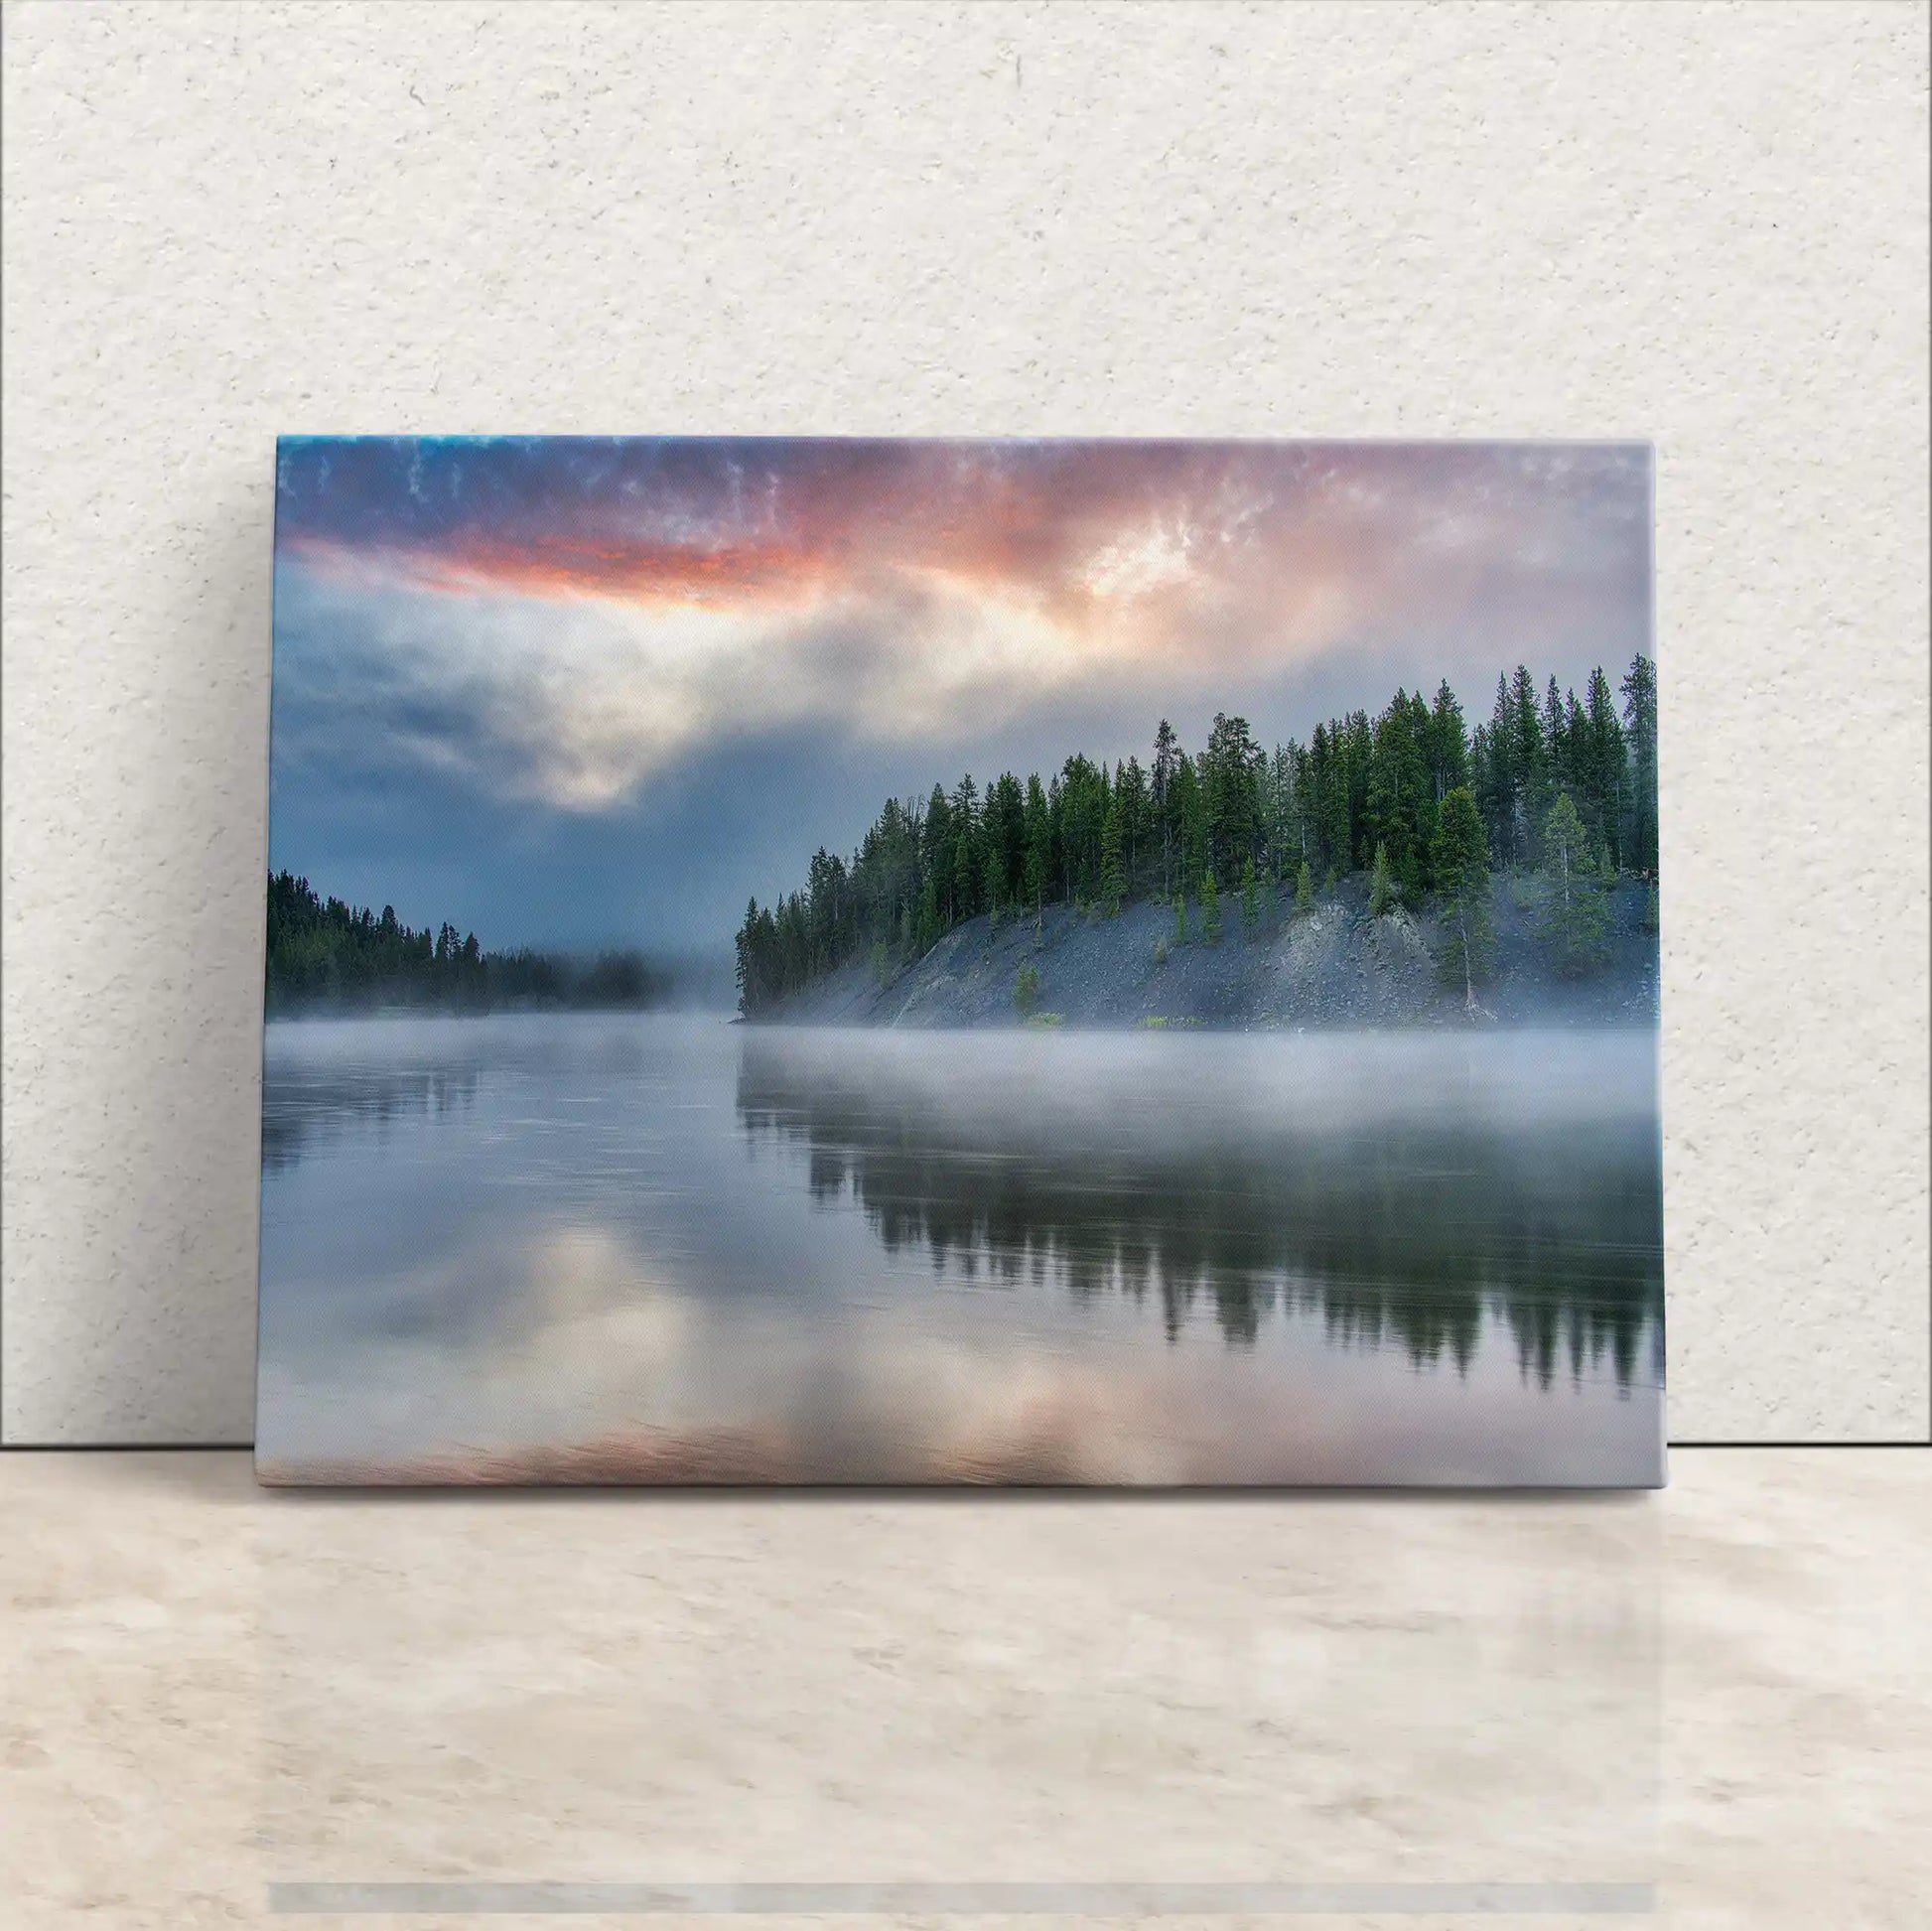 Gallery-wrapped canvas of Yellowstone Lake at sunrise reflecting a foggy forest, leaning against a wall.